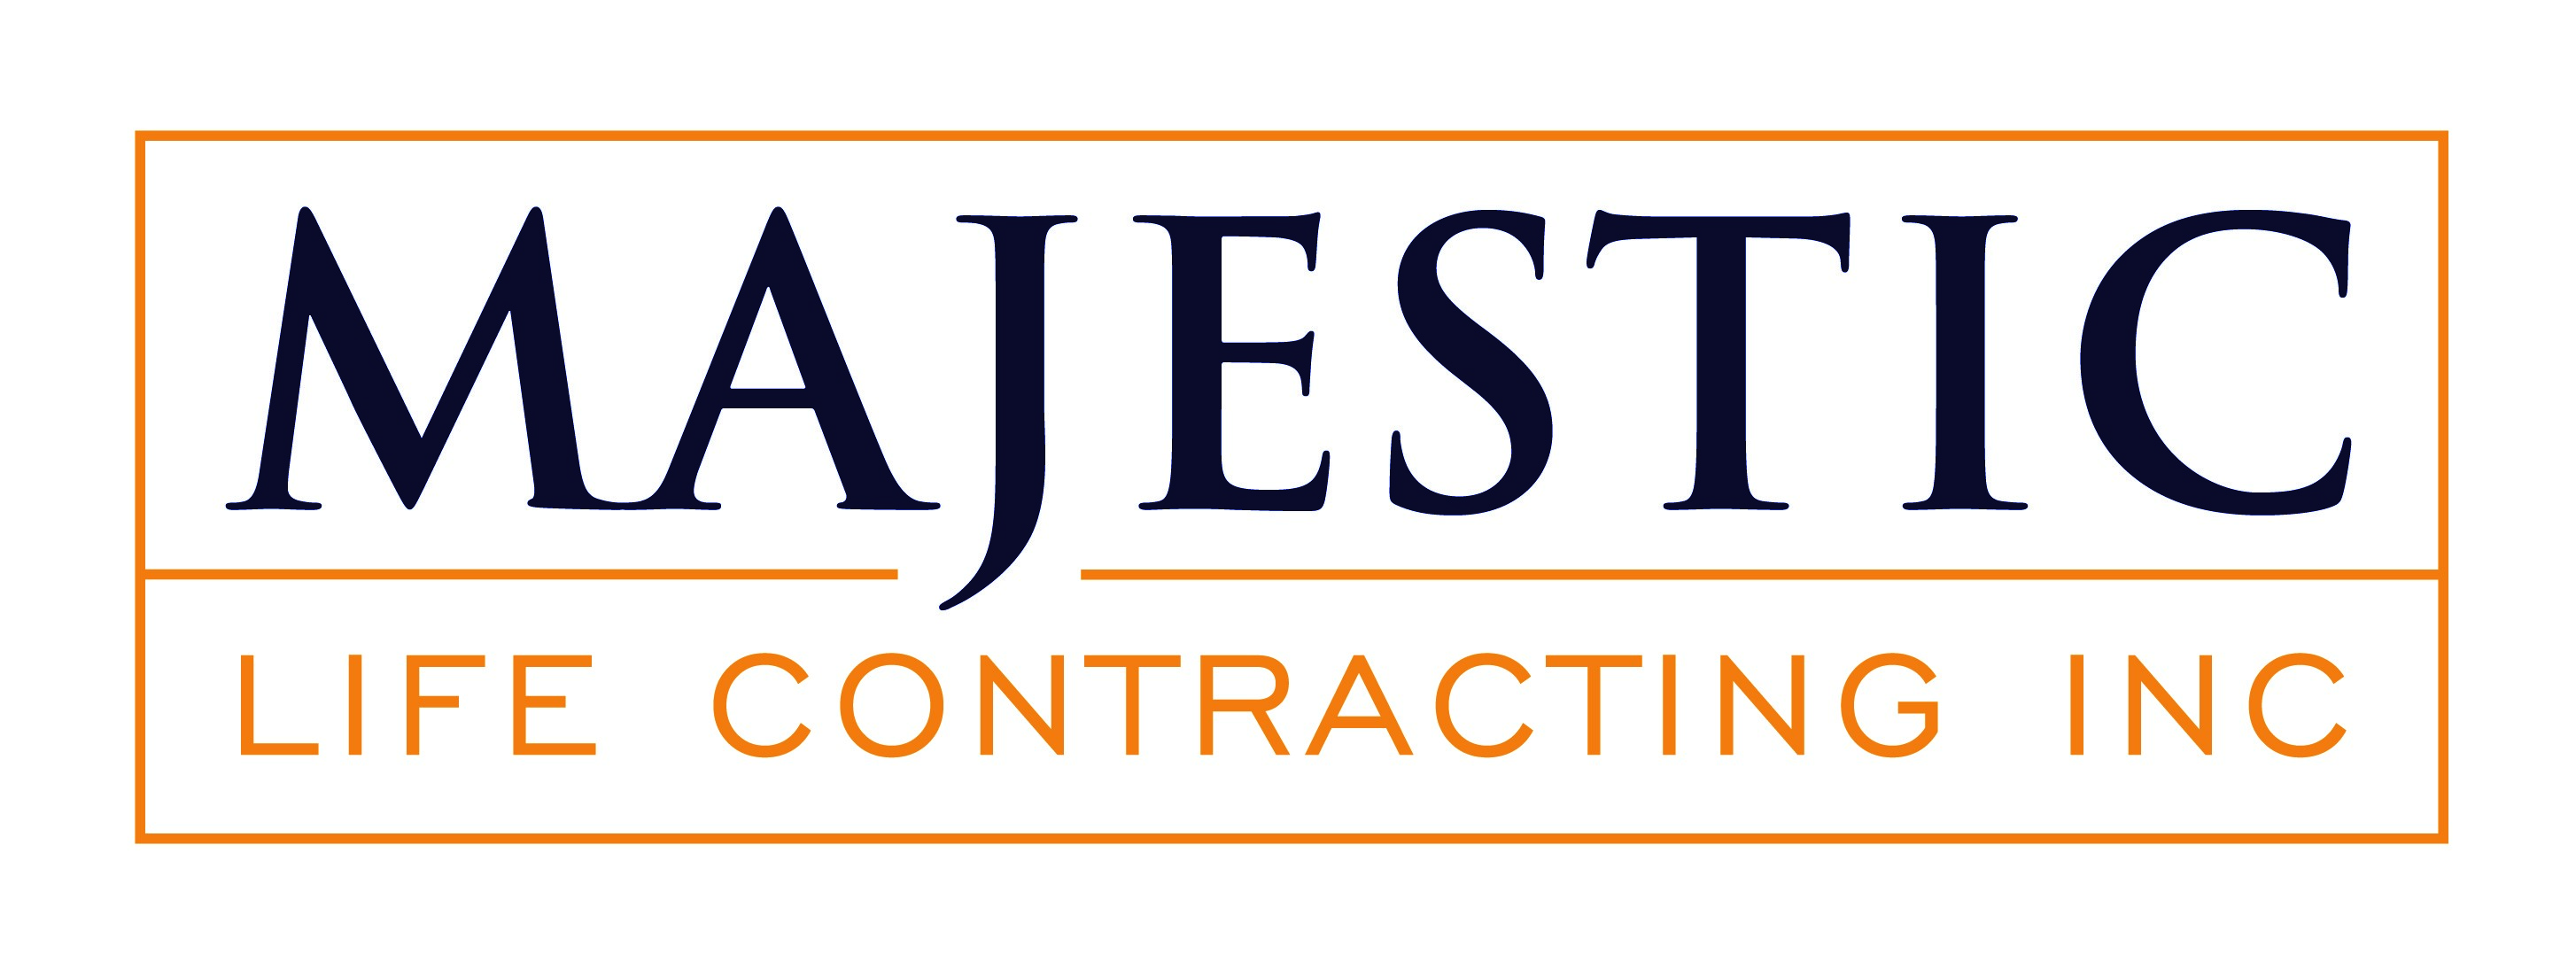 Majestic Life Contracting, Inc.